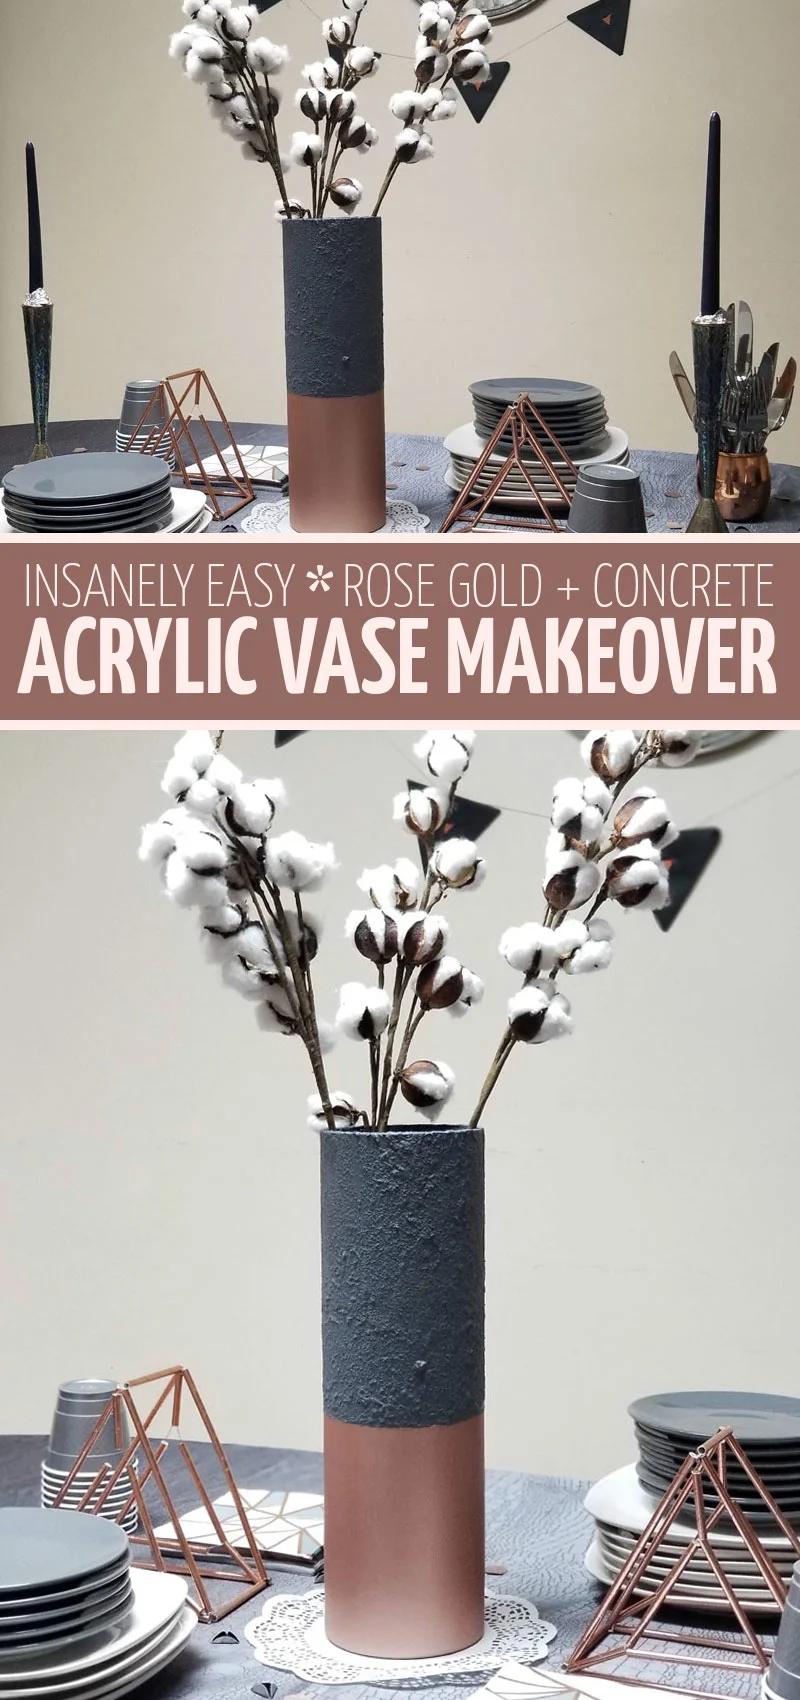 Click to learn how to do this painted vase makeover - turn an acrylic vase into a gorgeous textured concree and rose gold centerpiece! This beautiful charcoal and copper tablescape is perfect for Thanksgiving and Purim and everything in between.